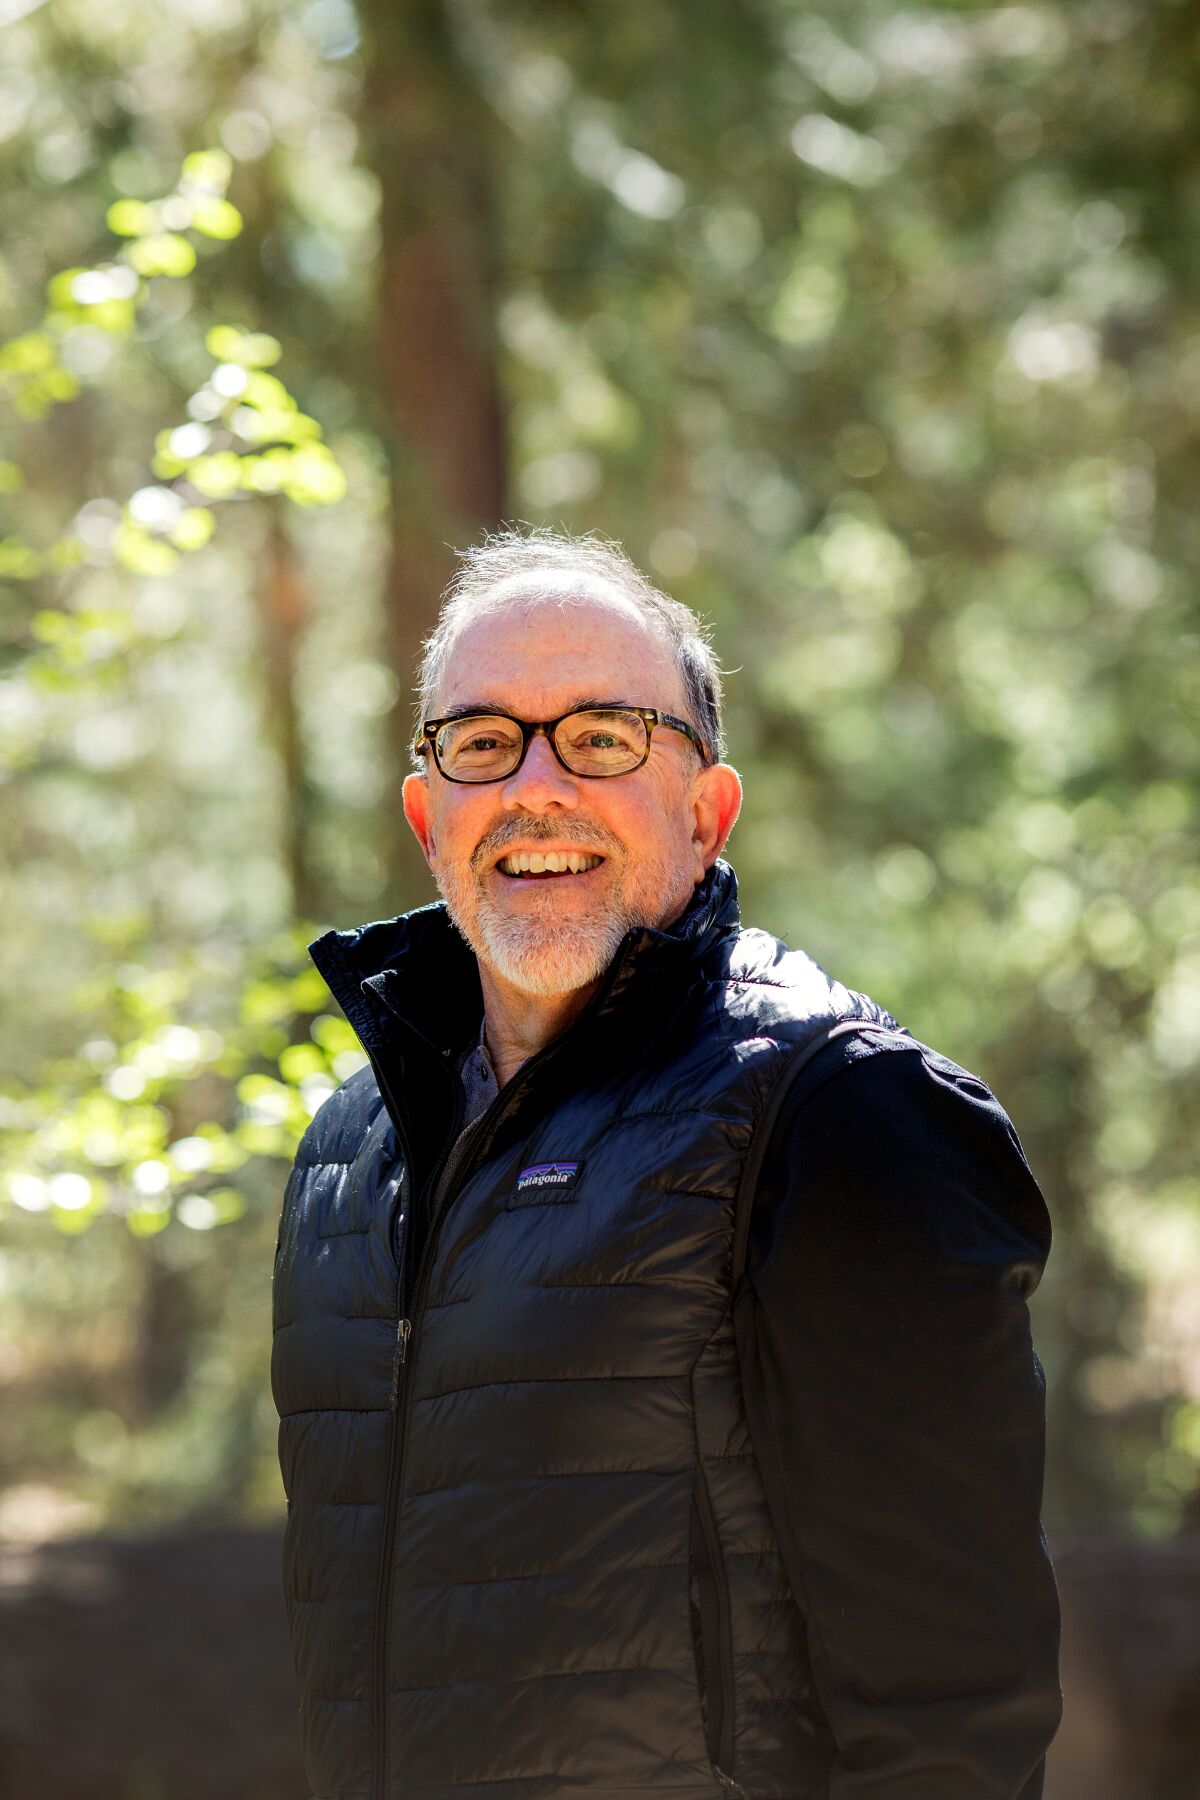 Author John Farrell in a padded jacket in nature